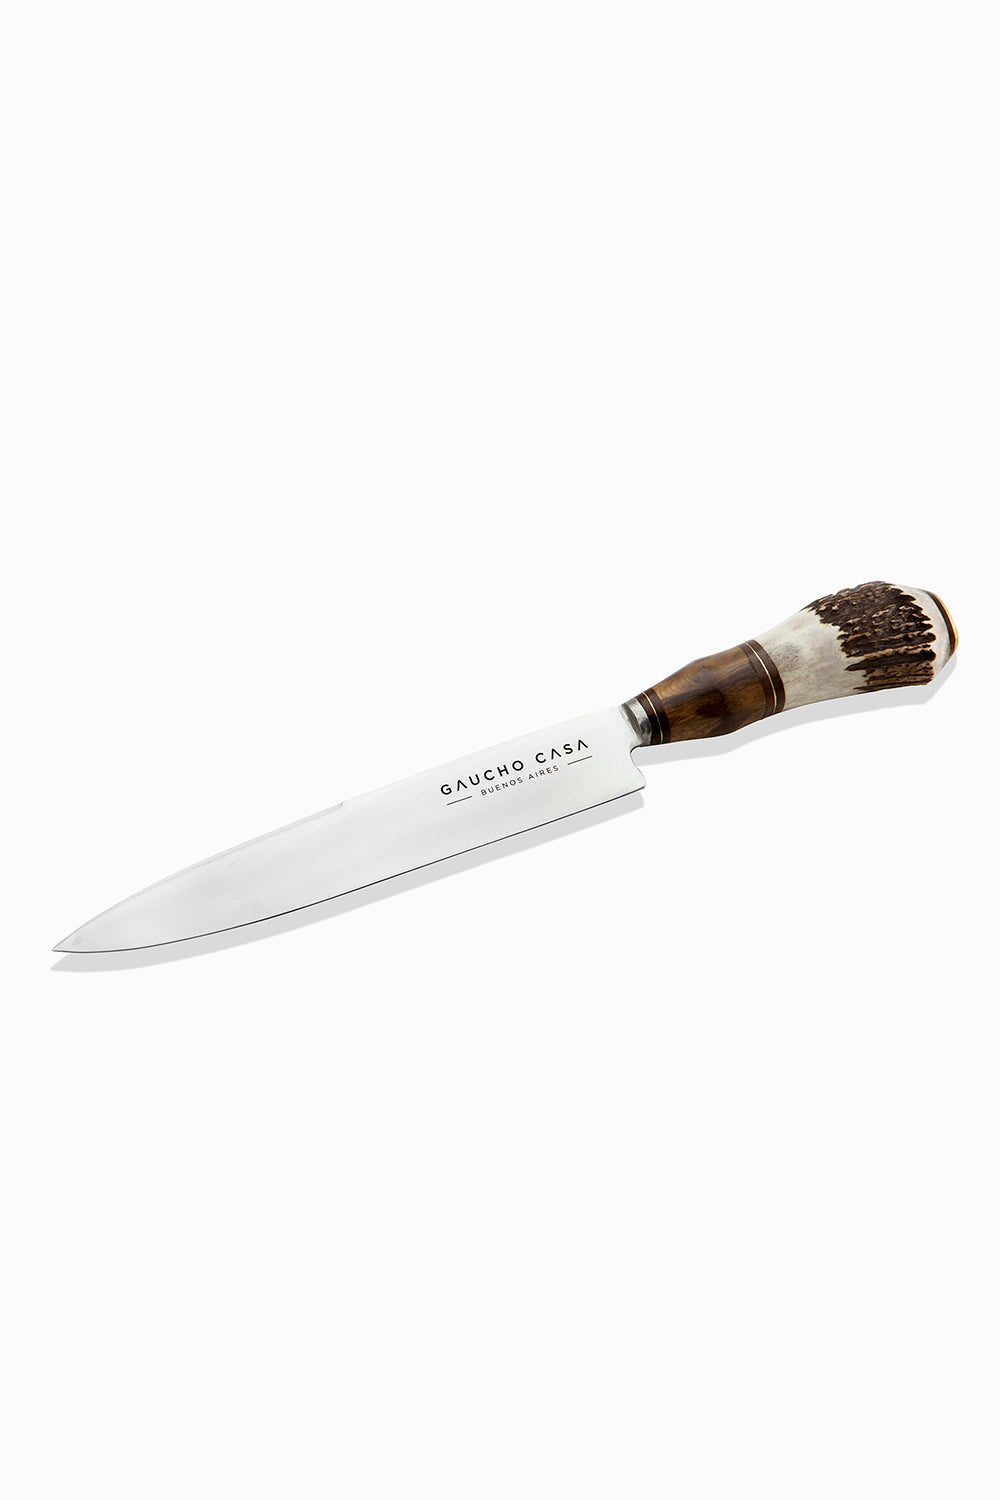 Gaucho Casa Tandil Gaucho Knife With Deer-Horn and Guayubira-Handle and Stainless-Steel Blade